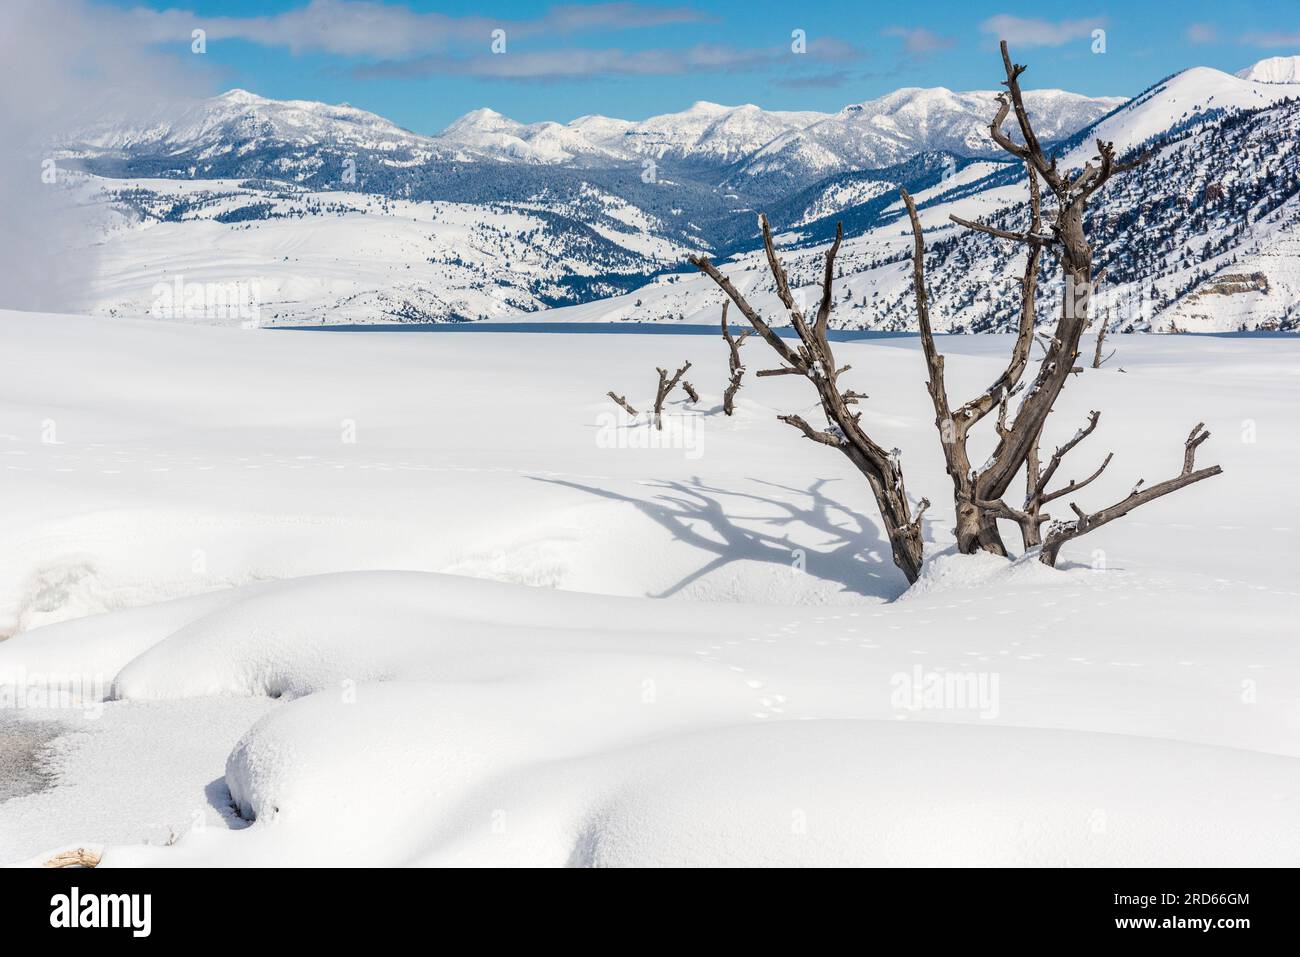 Mammoth Hot Springs in Yellowstone National Park in winter. Stock Photo